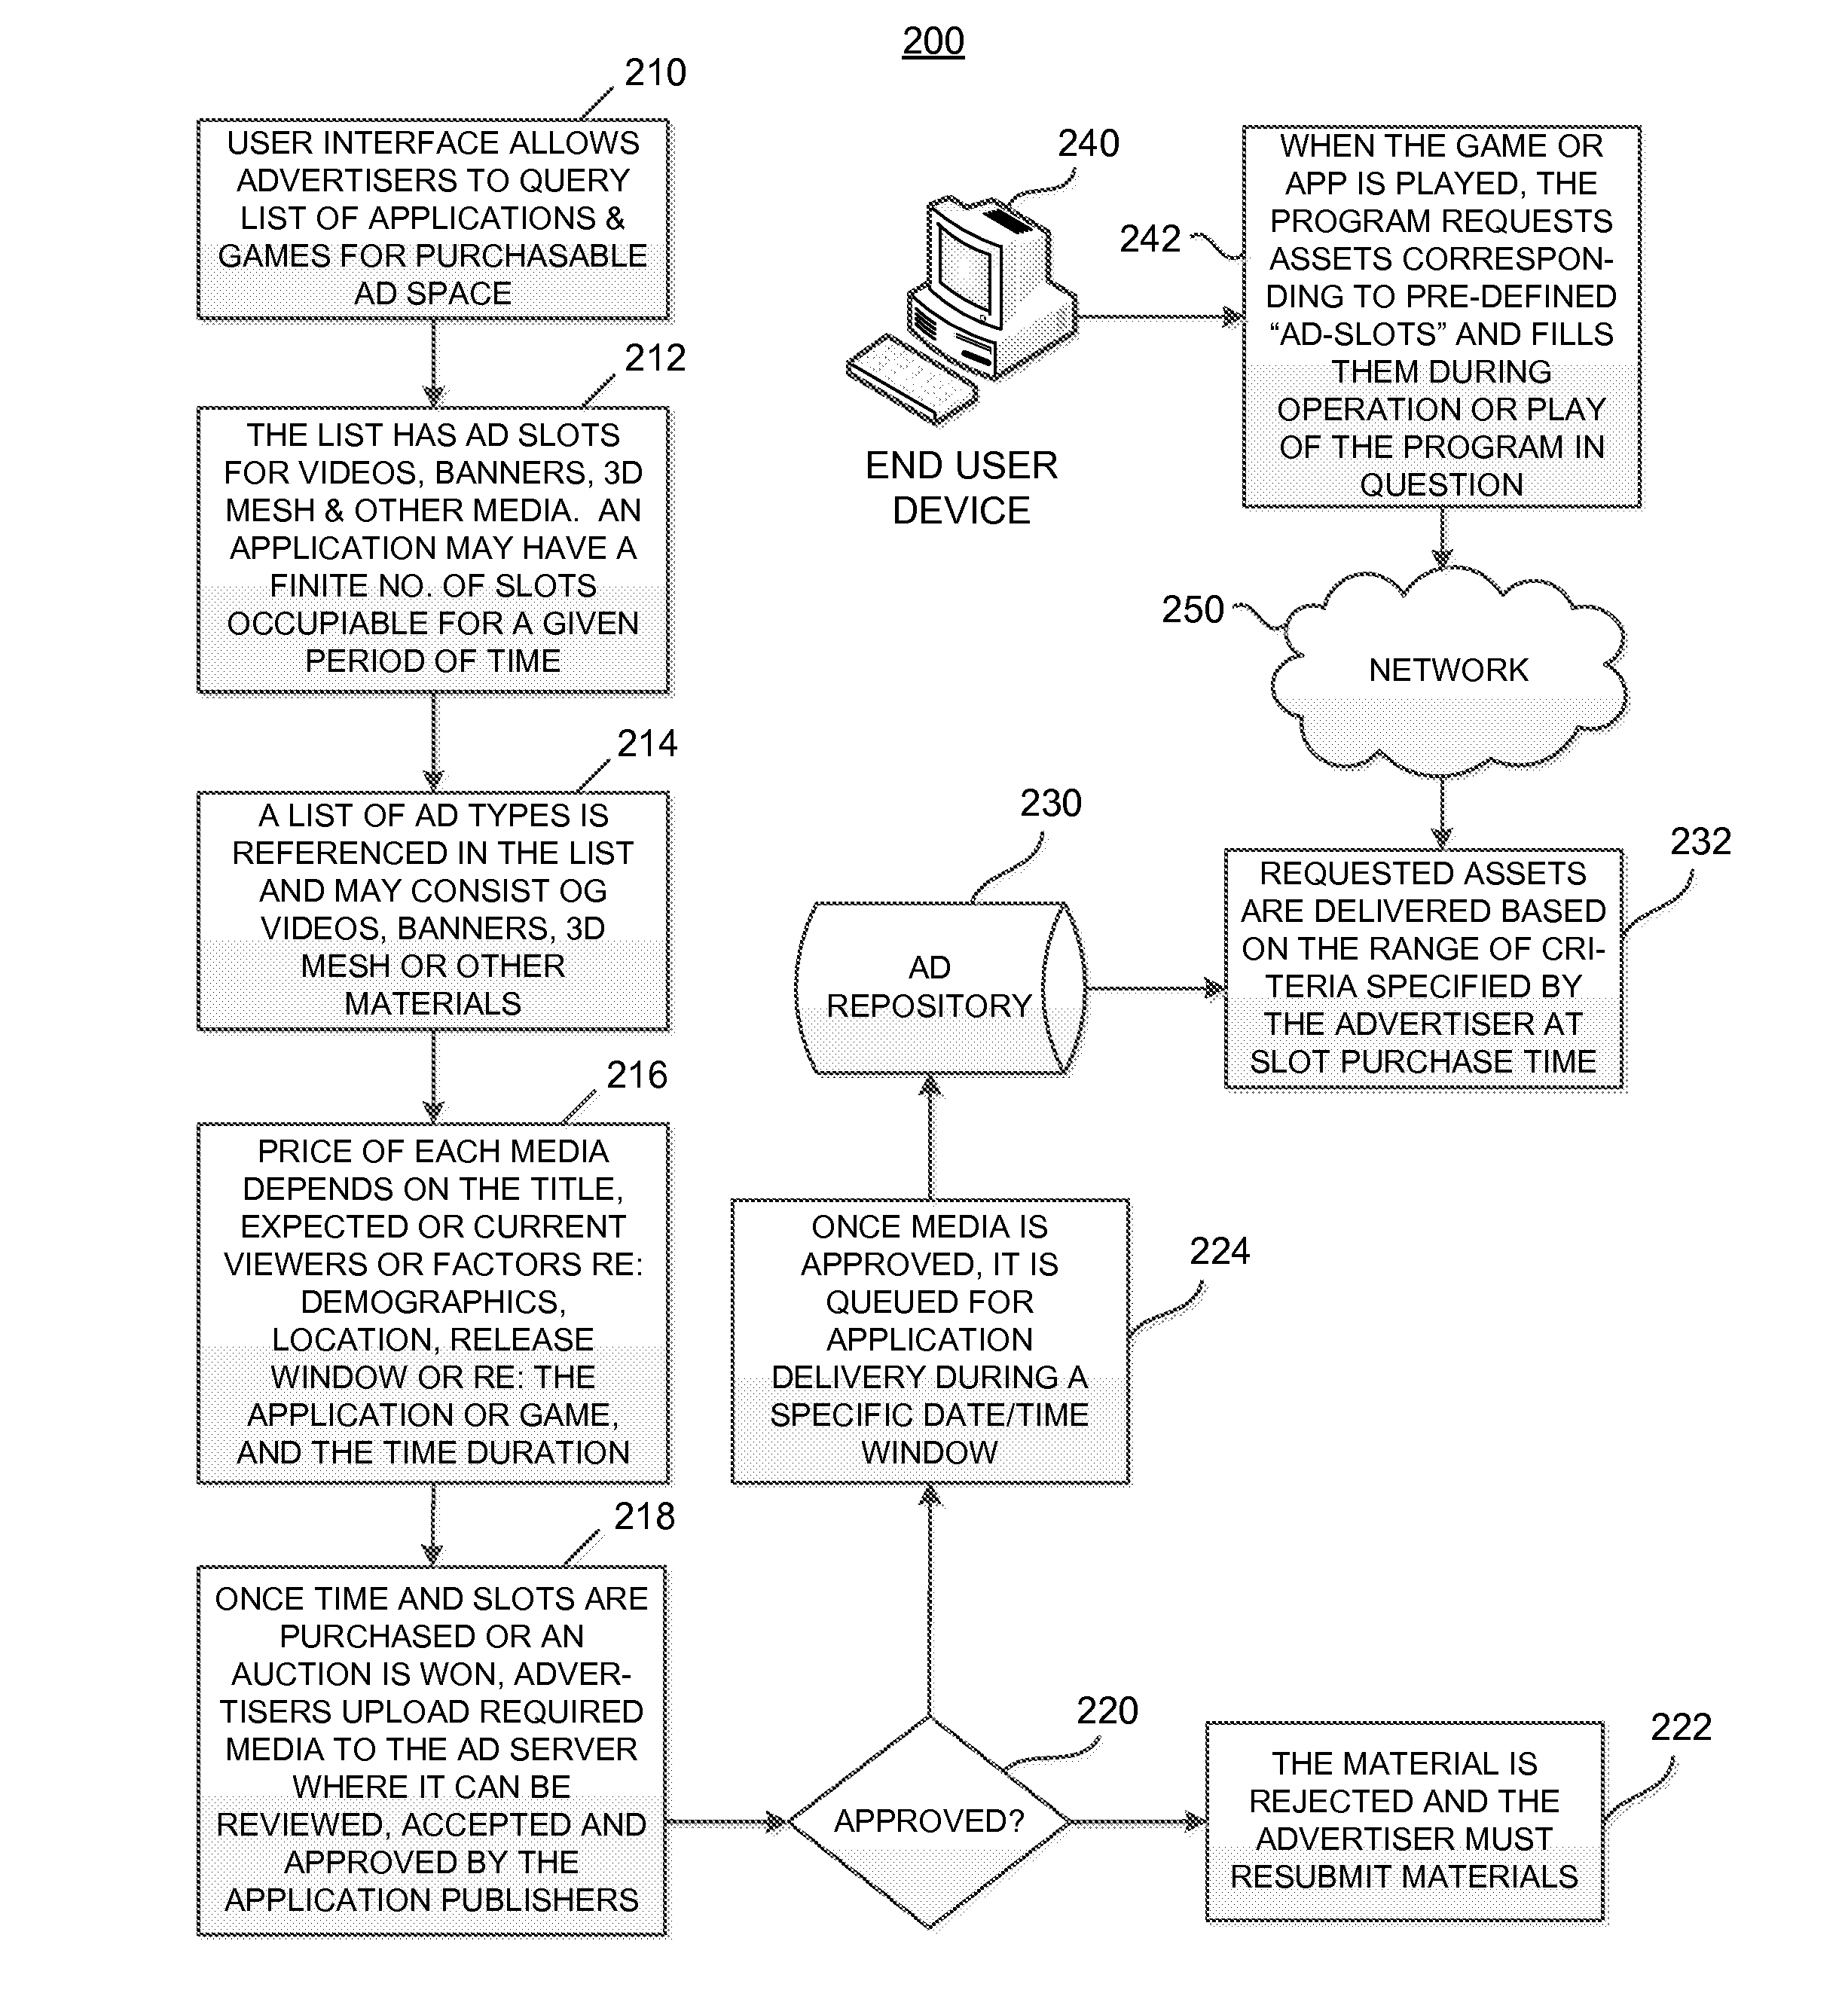 Systems and Methods for Providing an Interface for Purchasing Ad Slots in an Executable Program